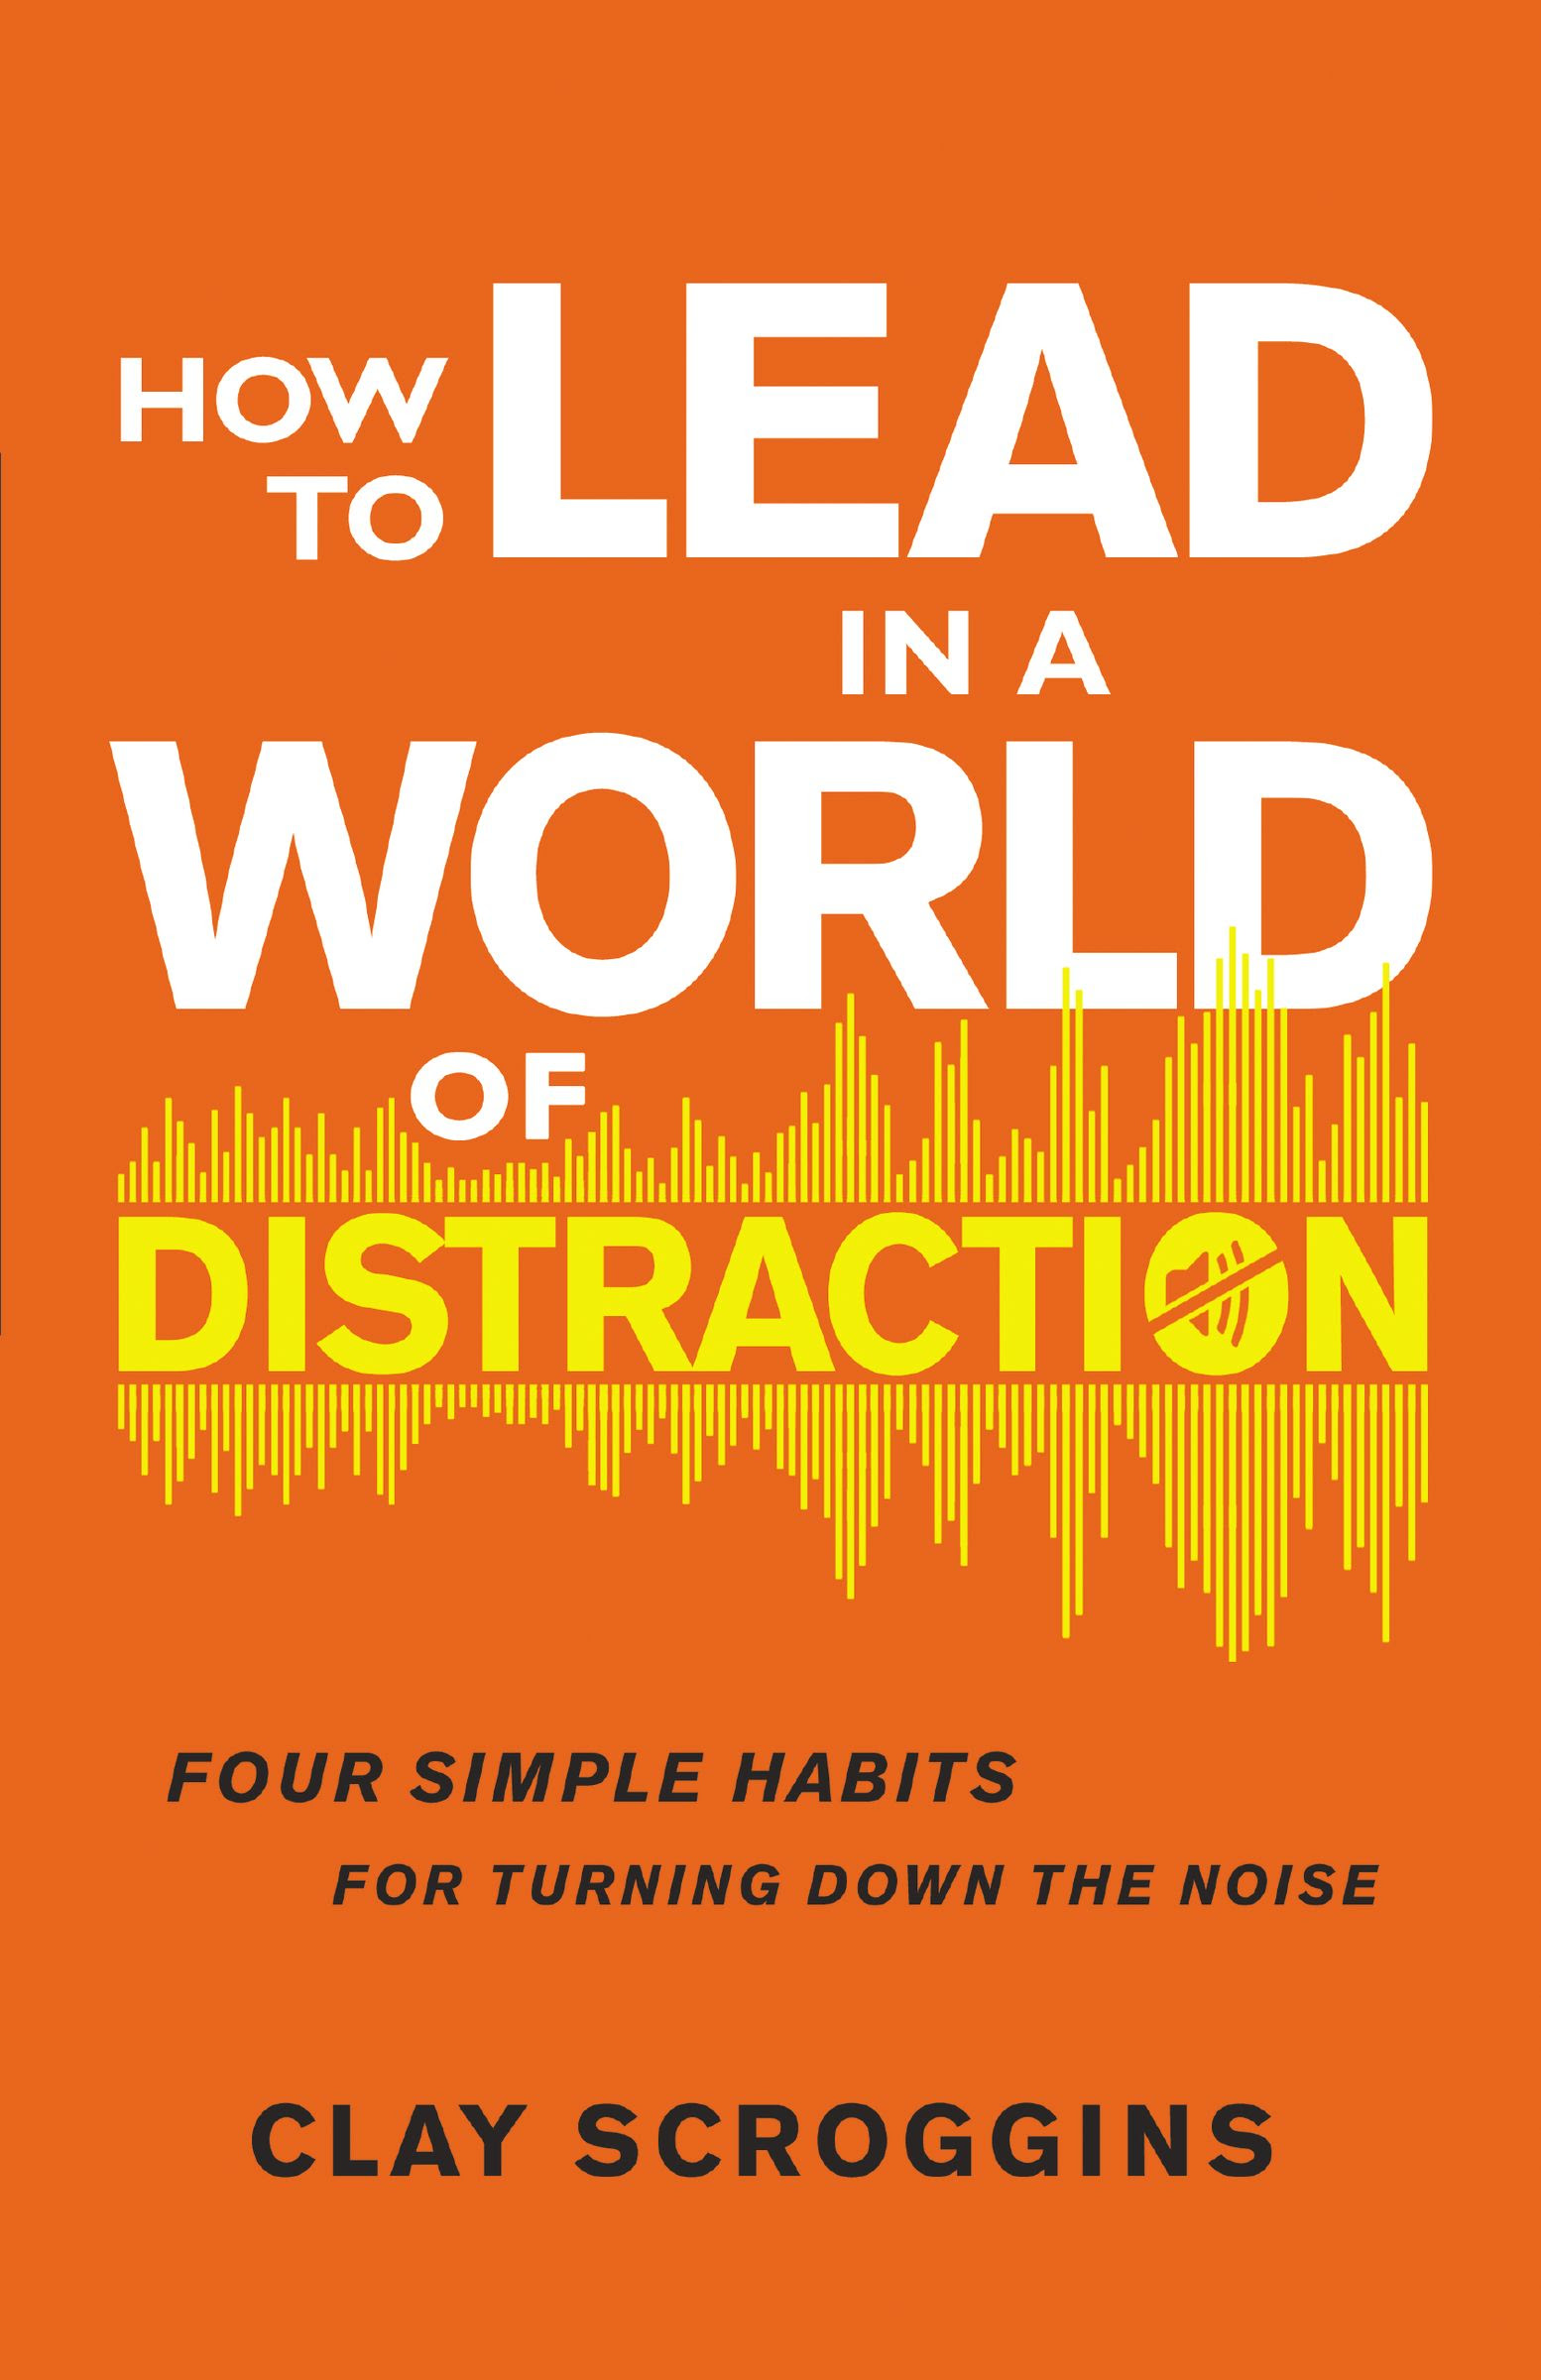 How to Lead in a World of Distraction: Four Simple Habits for Turning Down the Noise PDF